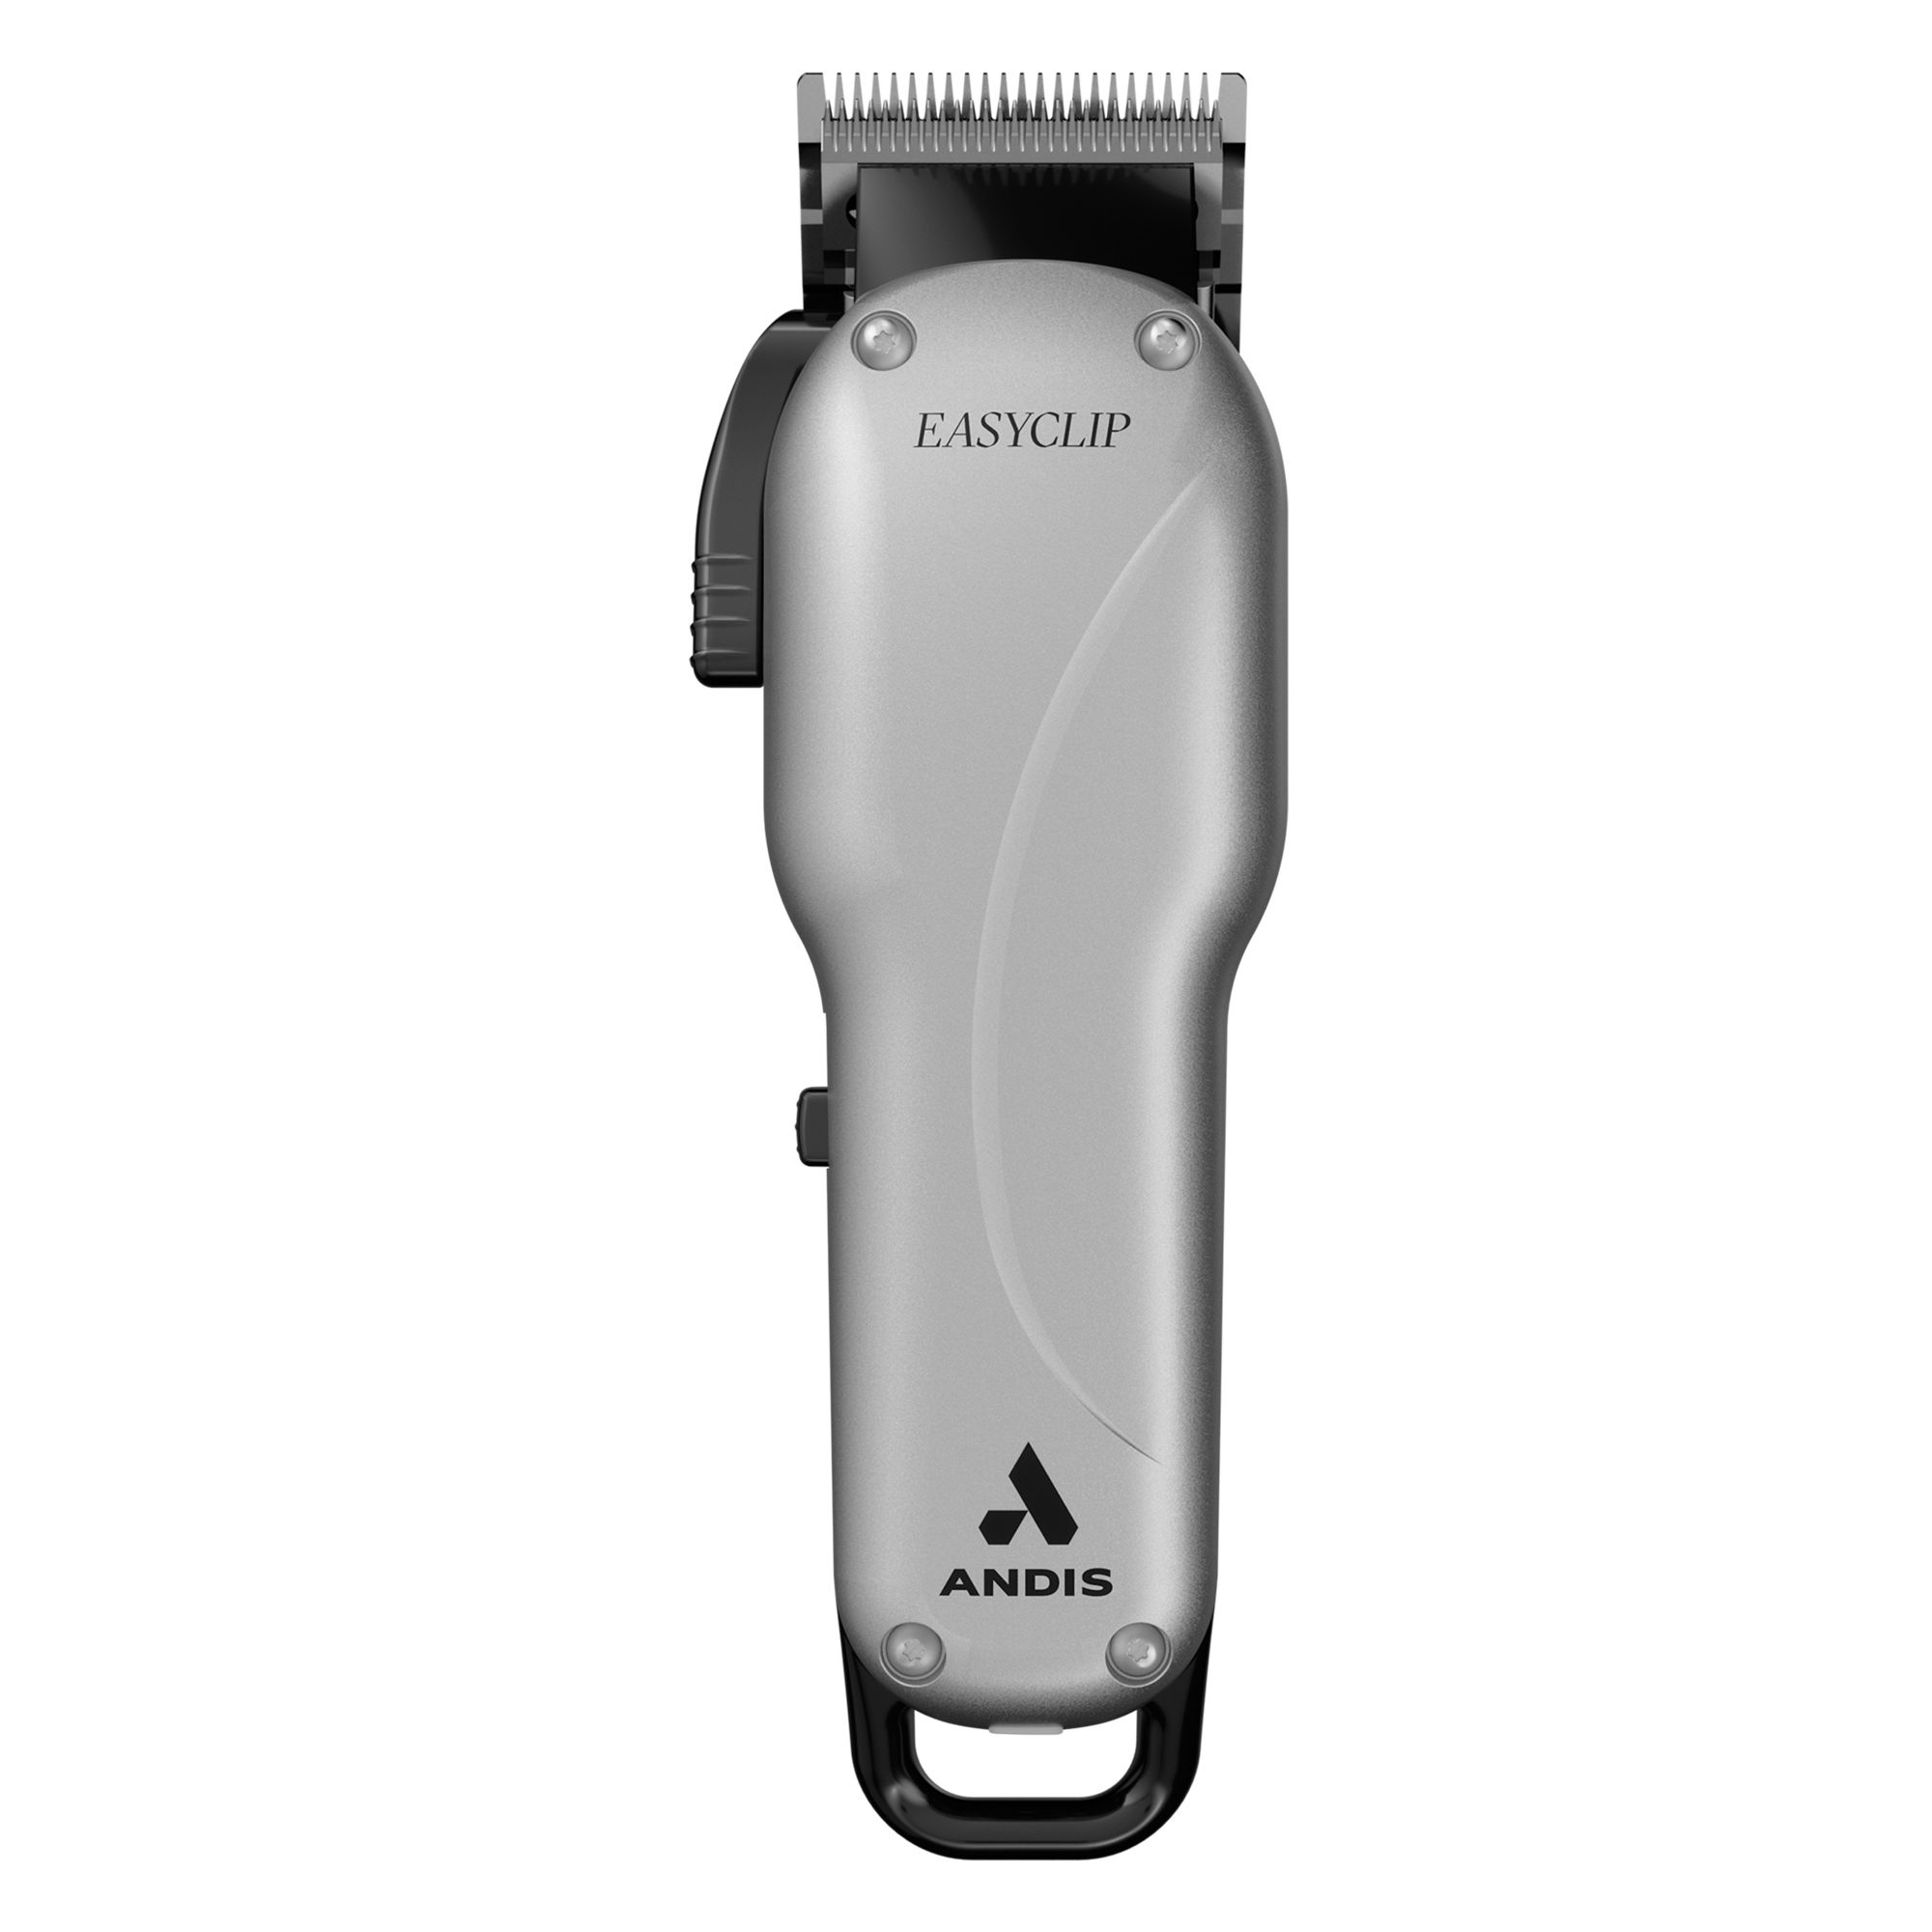 andis small trimmer